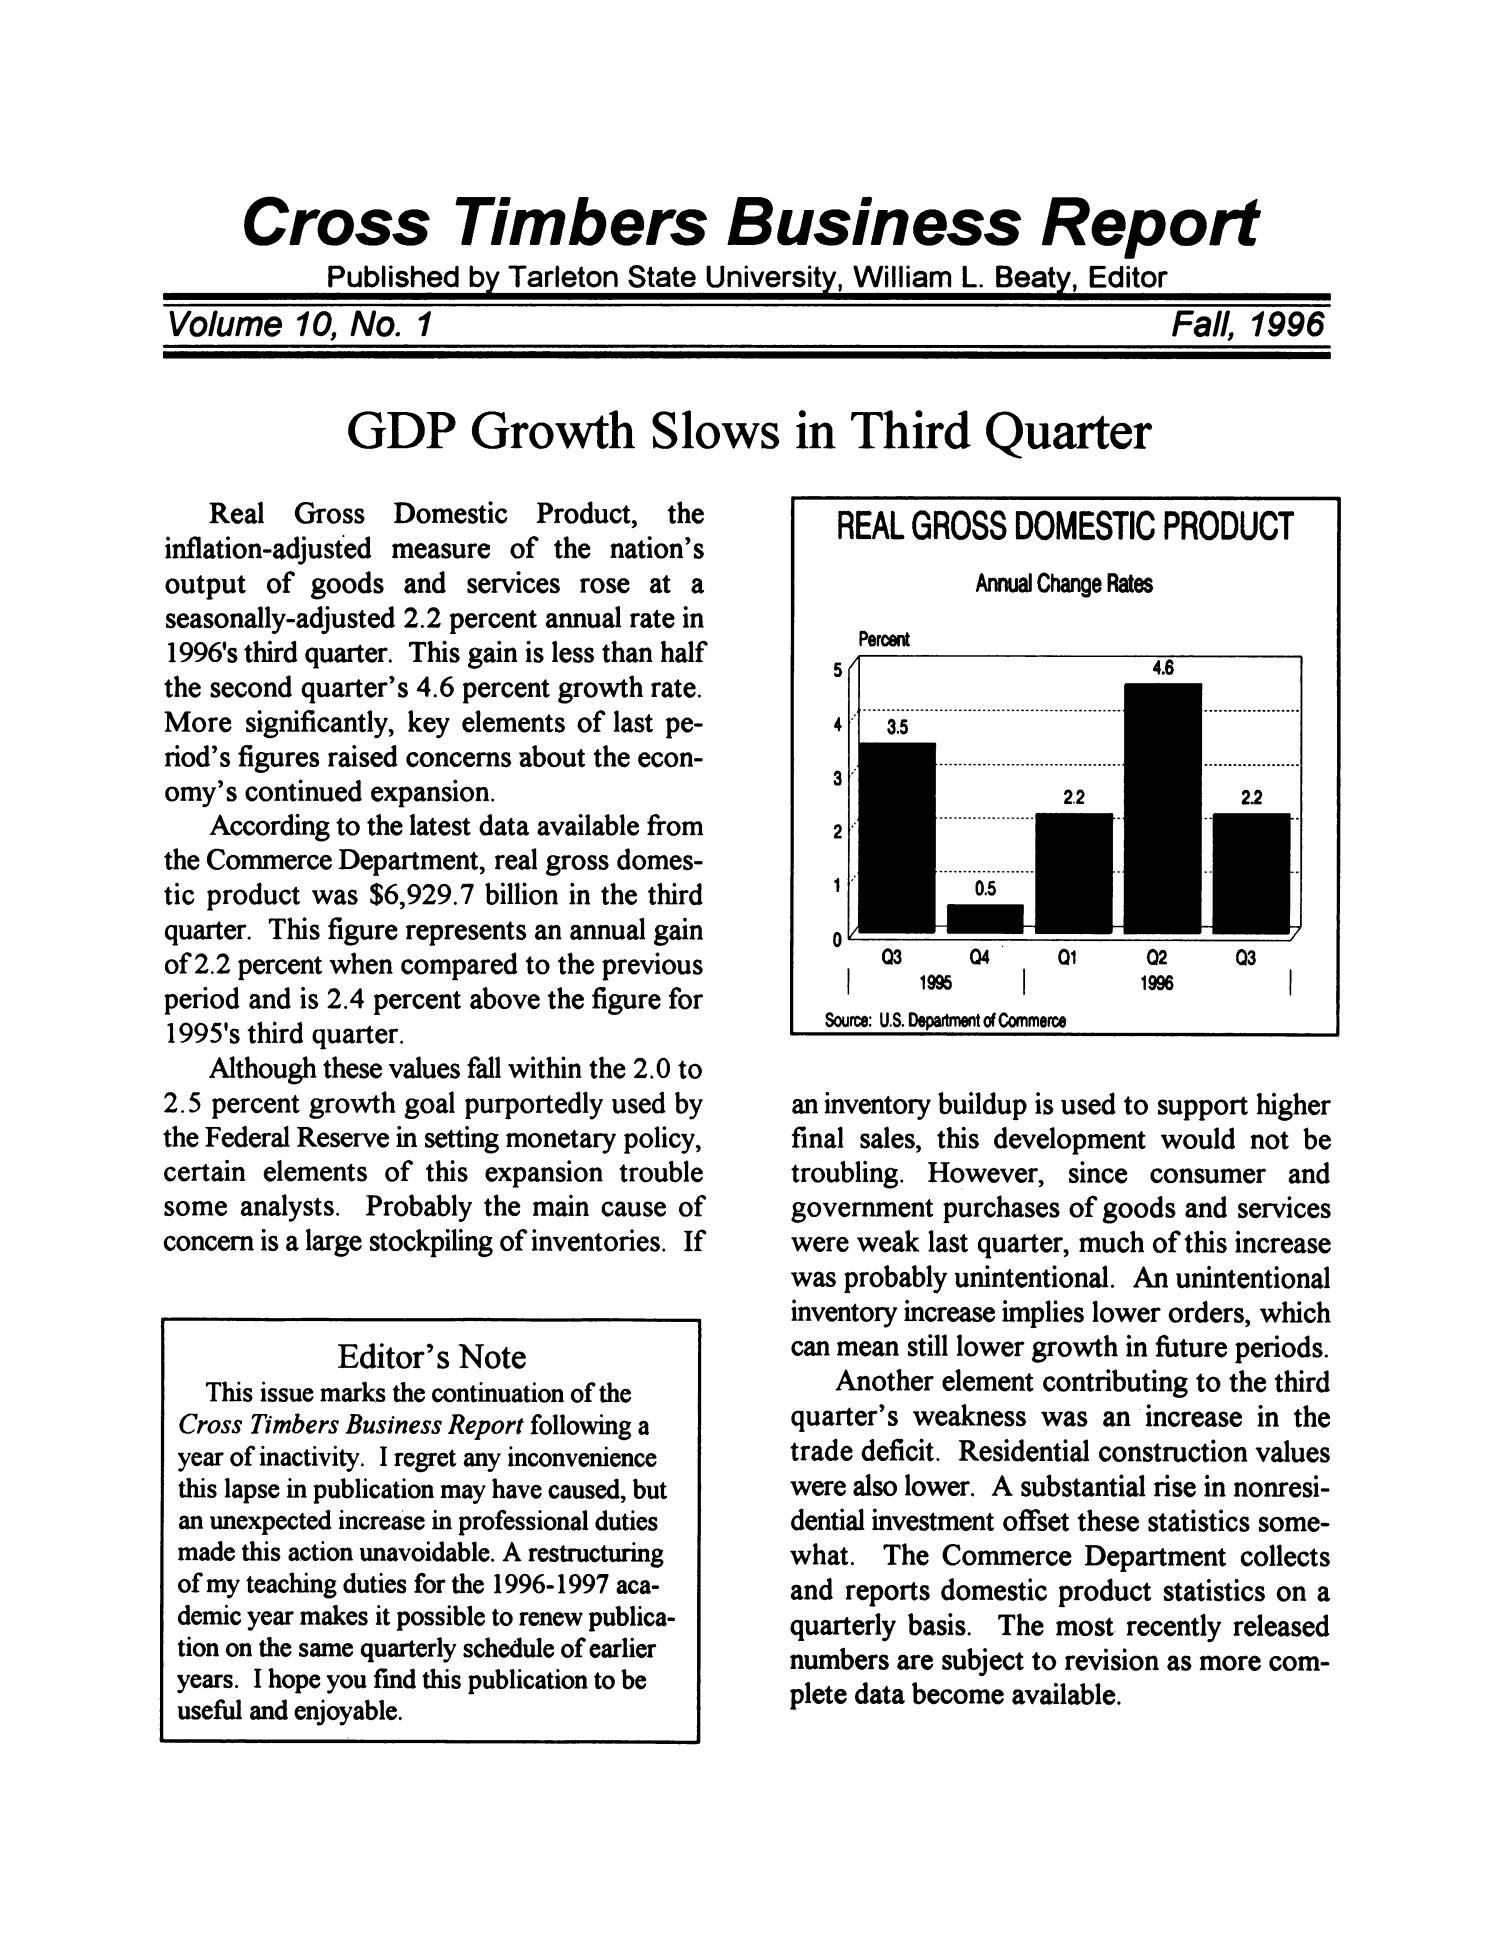 Cross Timbers Business Report, Volume 10, Number 1, Fall 1996
                                                
                                                    1
                                                